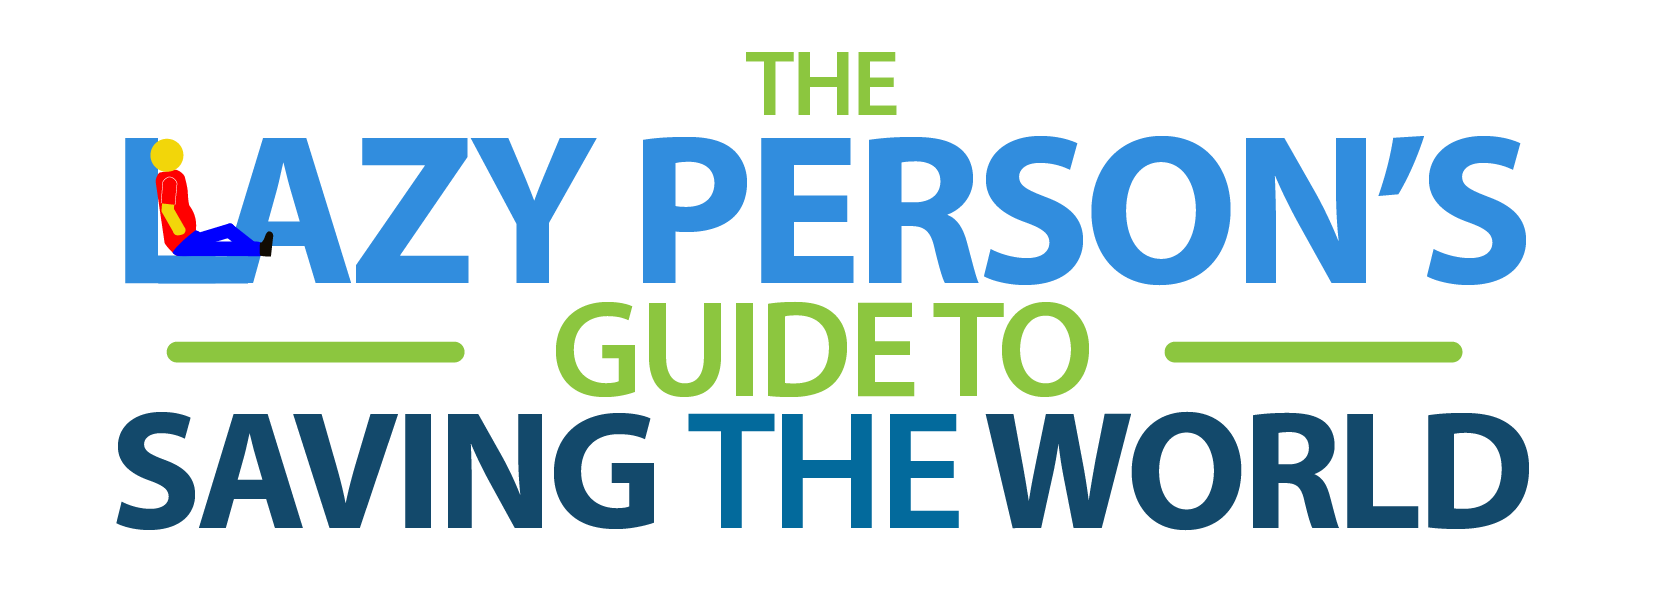 The Lazy Person's Guide to Saving the World